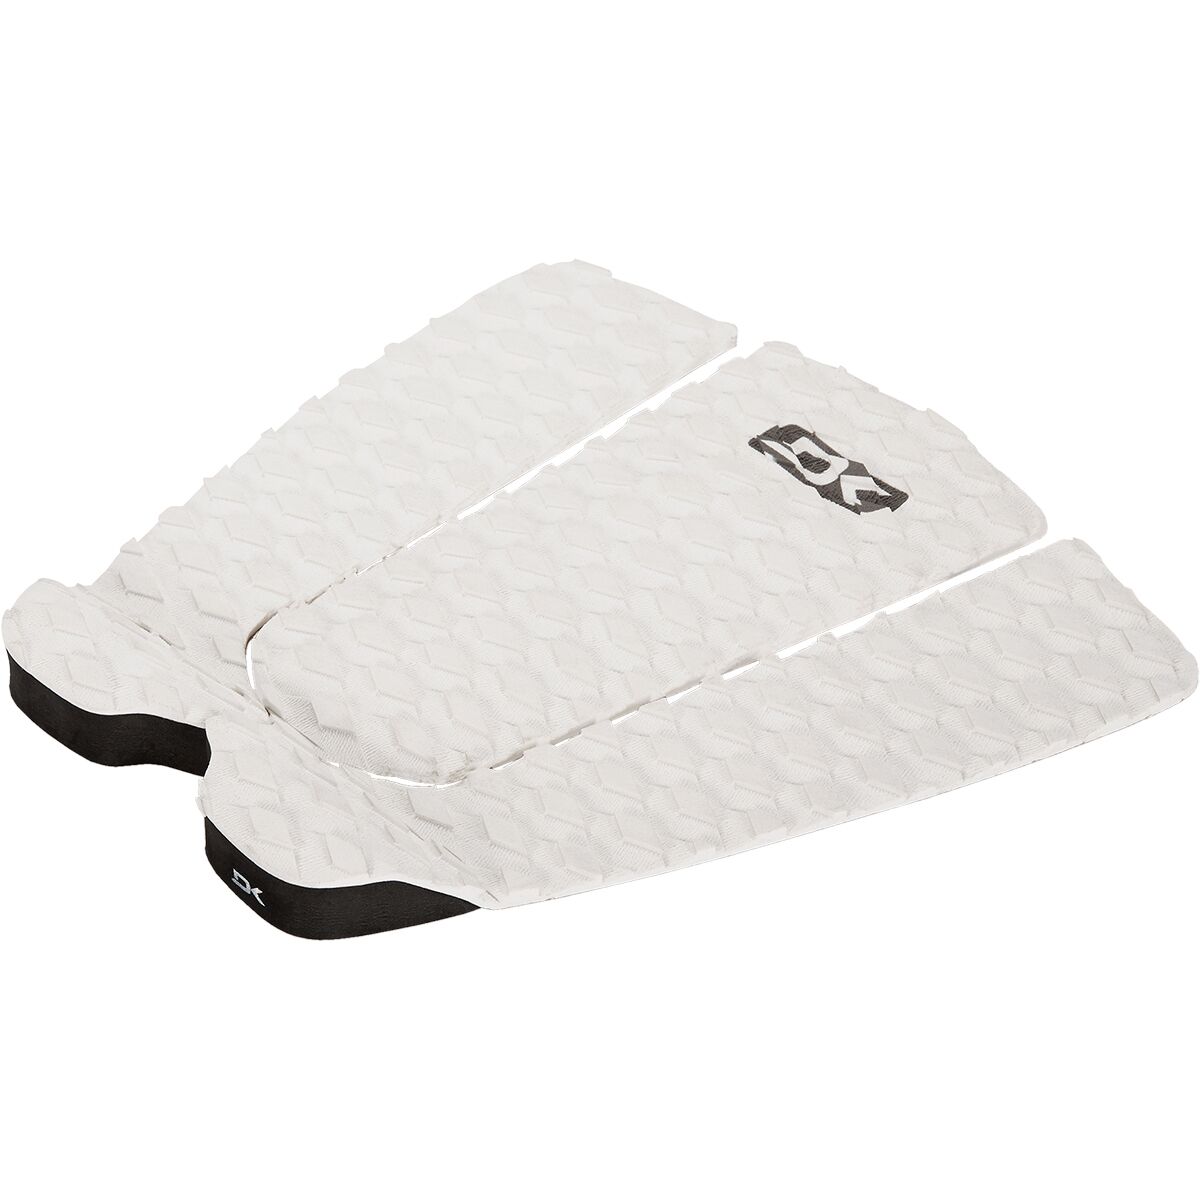 DAKINE Andy Irons Pro Model Traction Pad